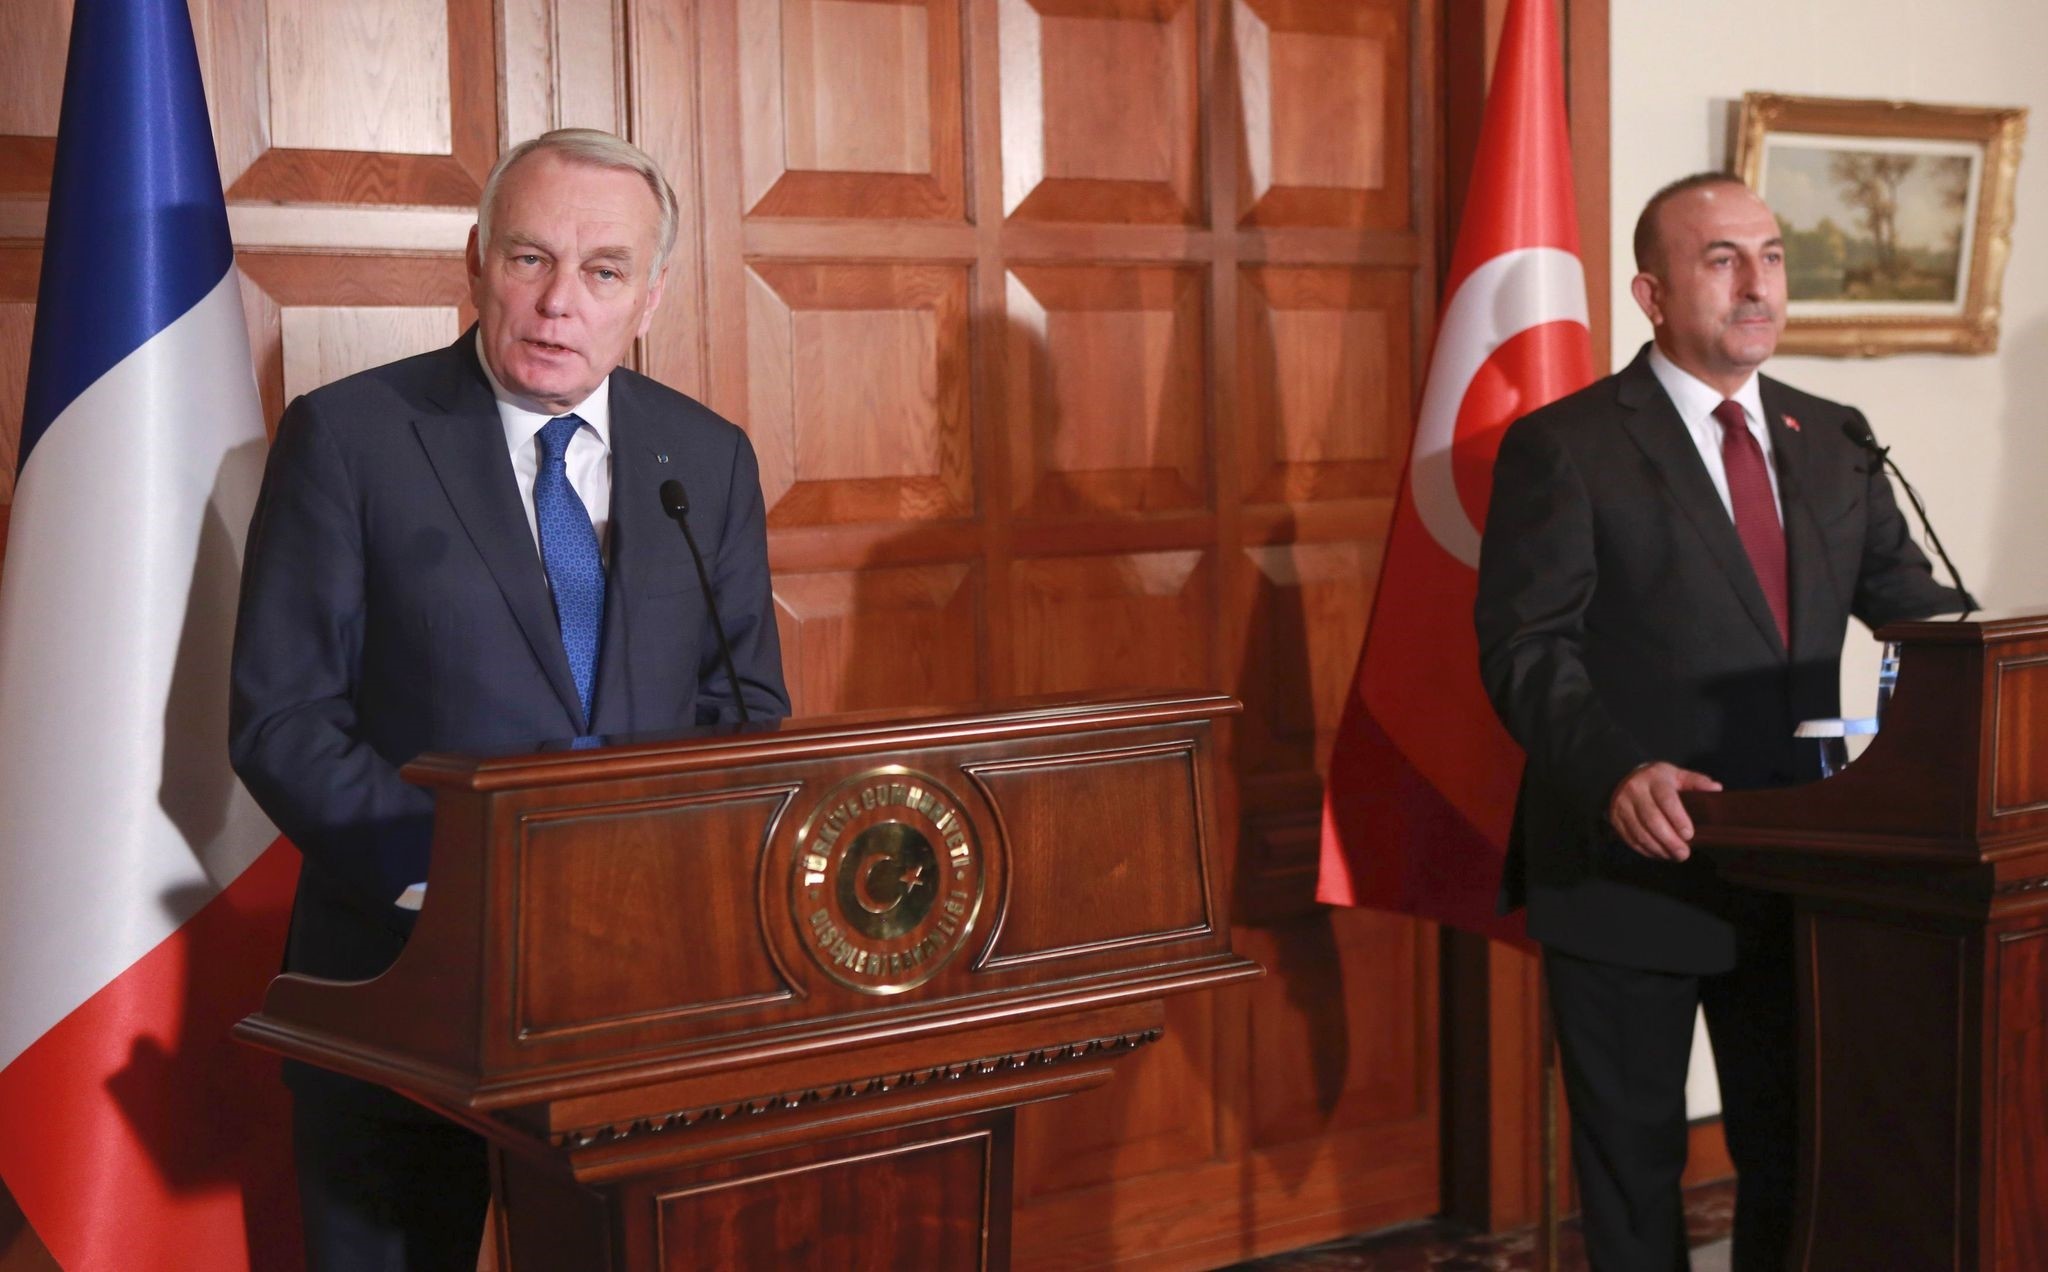 France's Foreign Minister Jean-Marc Ayrault (L), speaks during a joint news conference with Turkey's Foreign Minister Mevlu00fct u00c7avuu015fou011flu. (AFP Photo)